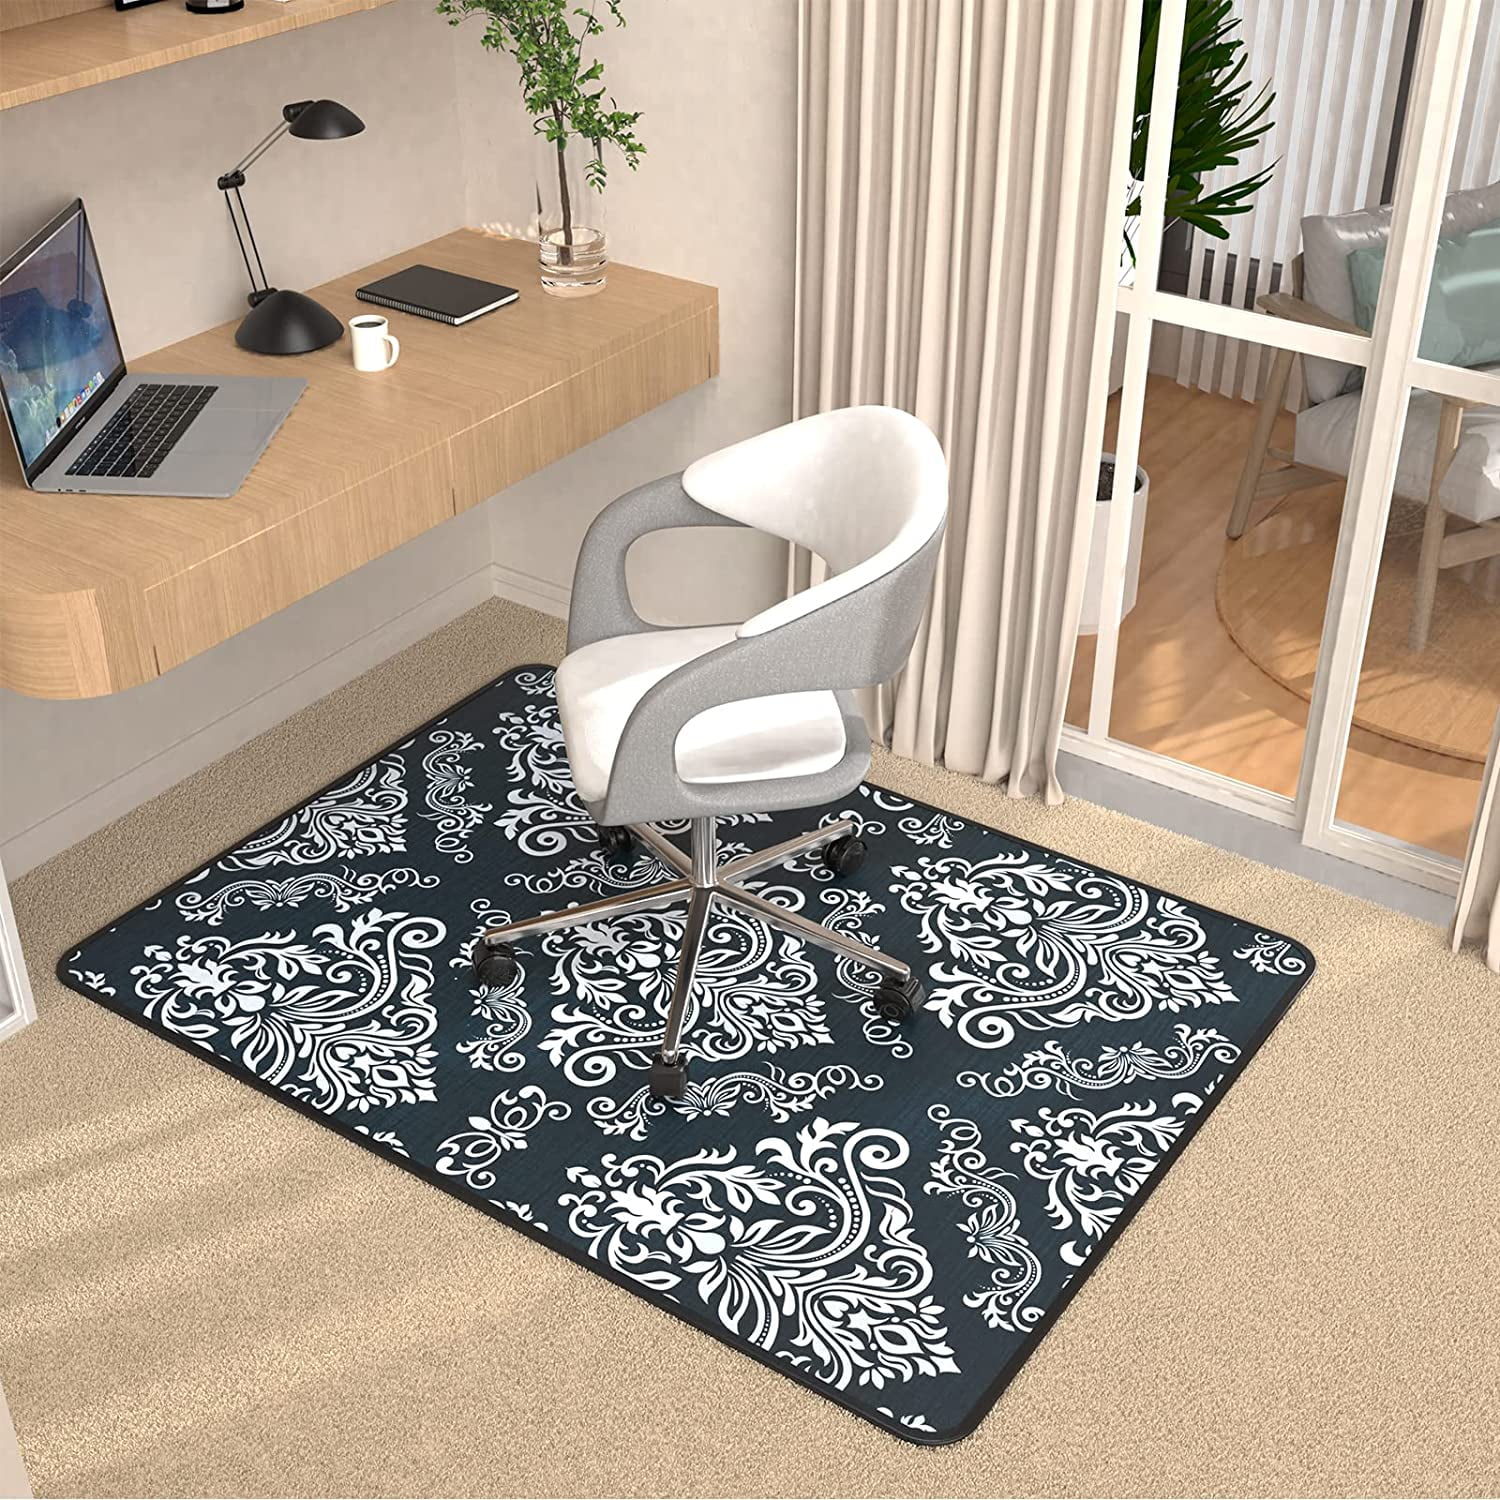 Oture Office Chair Mat,Office Desk Chair Mat for Hardwood Floors, 1/6 inch Thick 47 inchx35 inch Hard Floor Protector Mat, Multi-Purpose Chair Carpet for